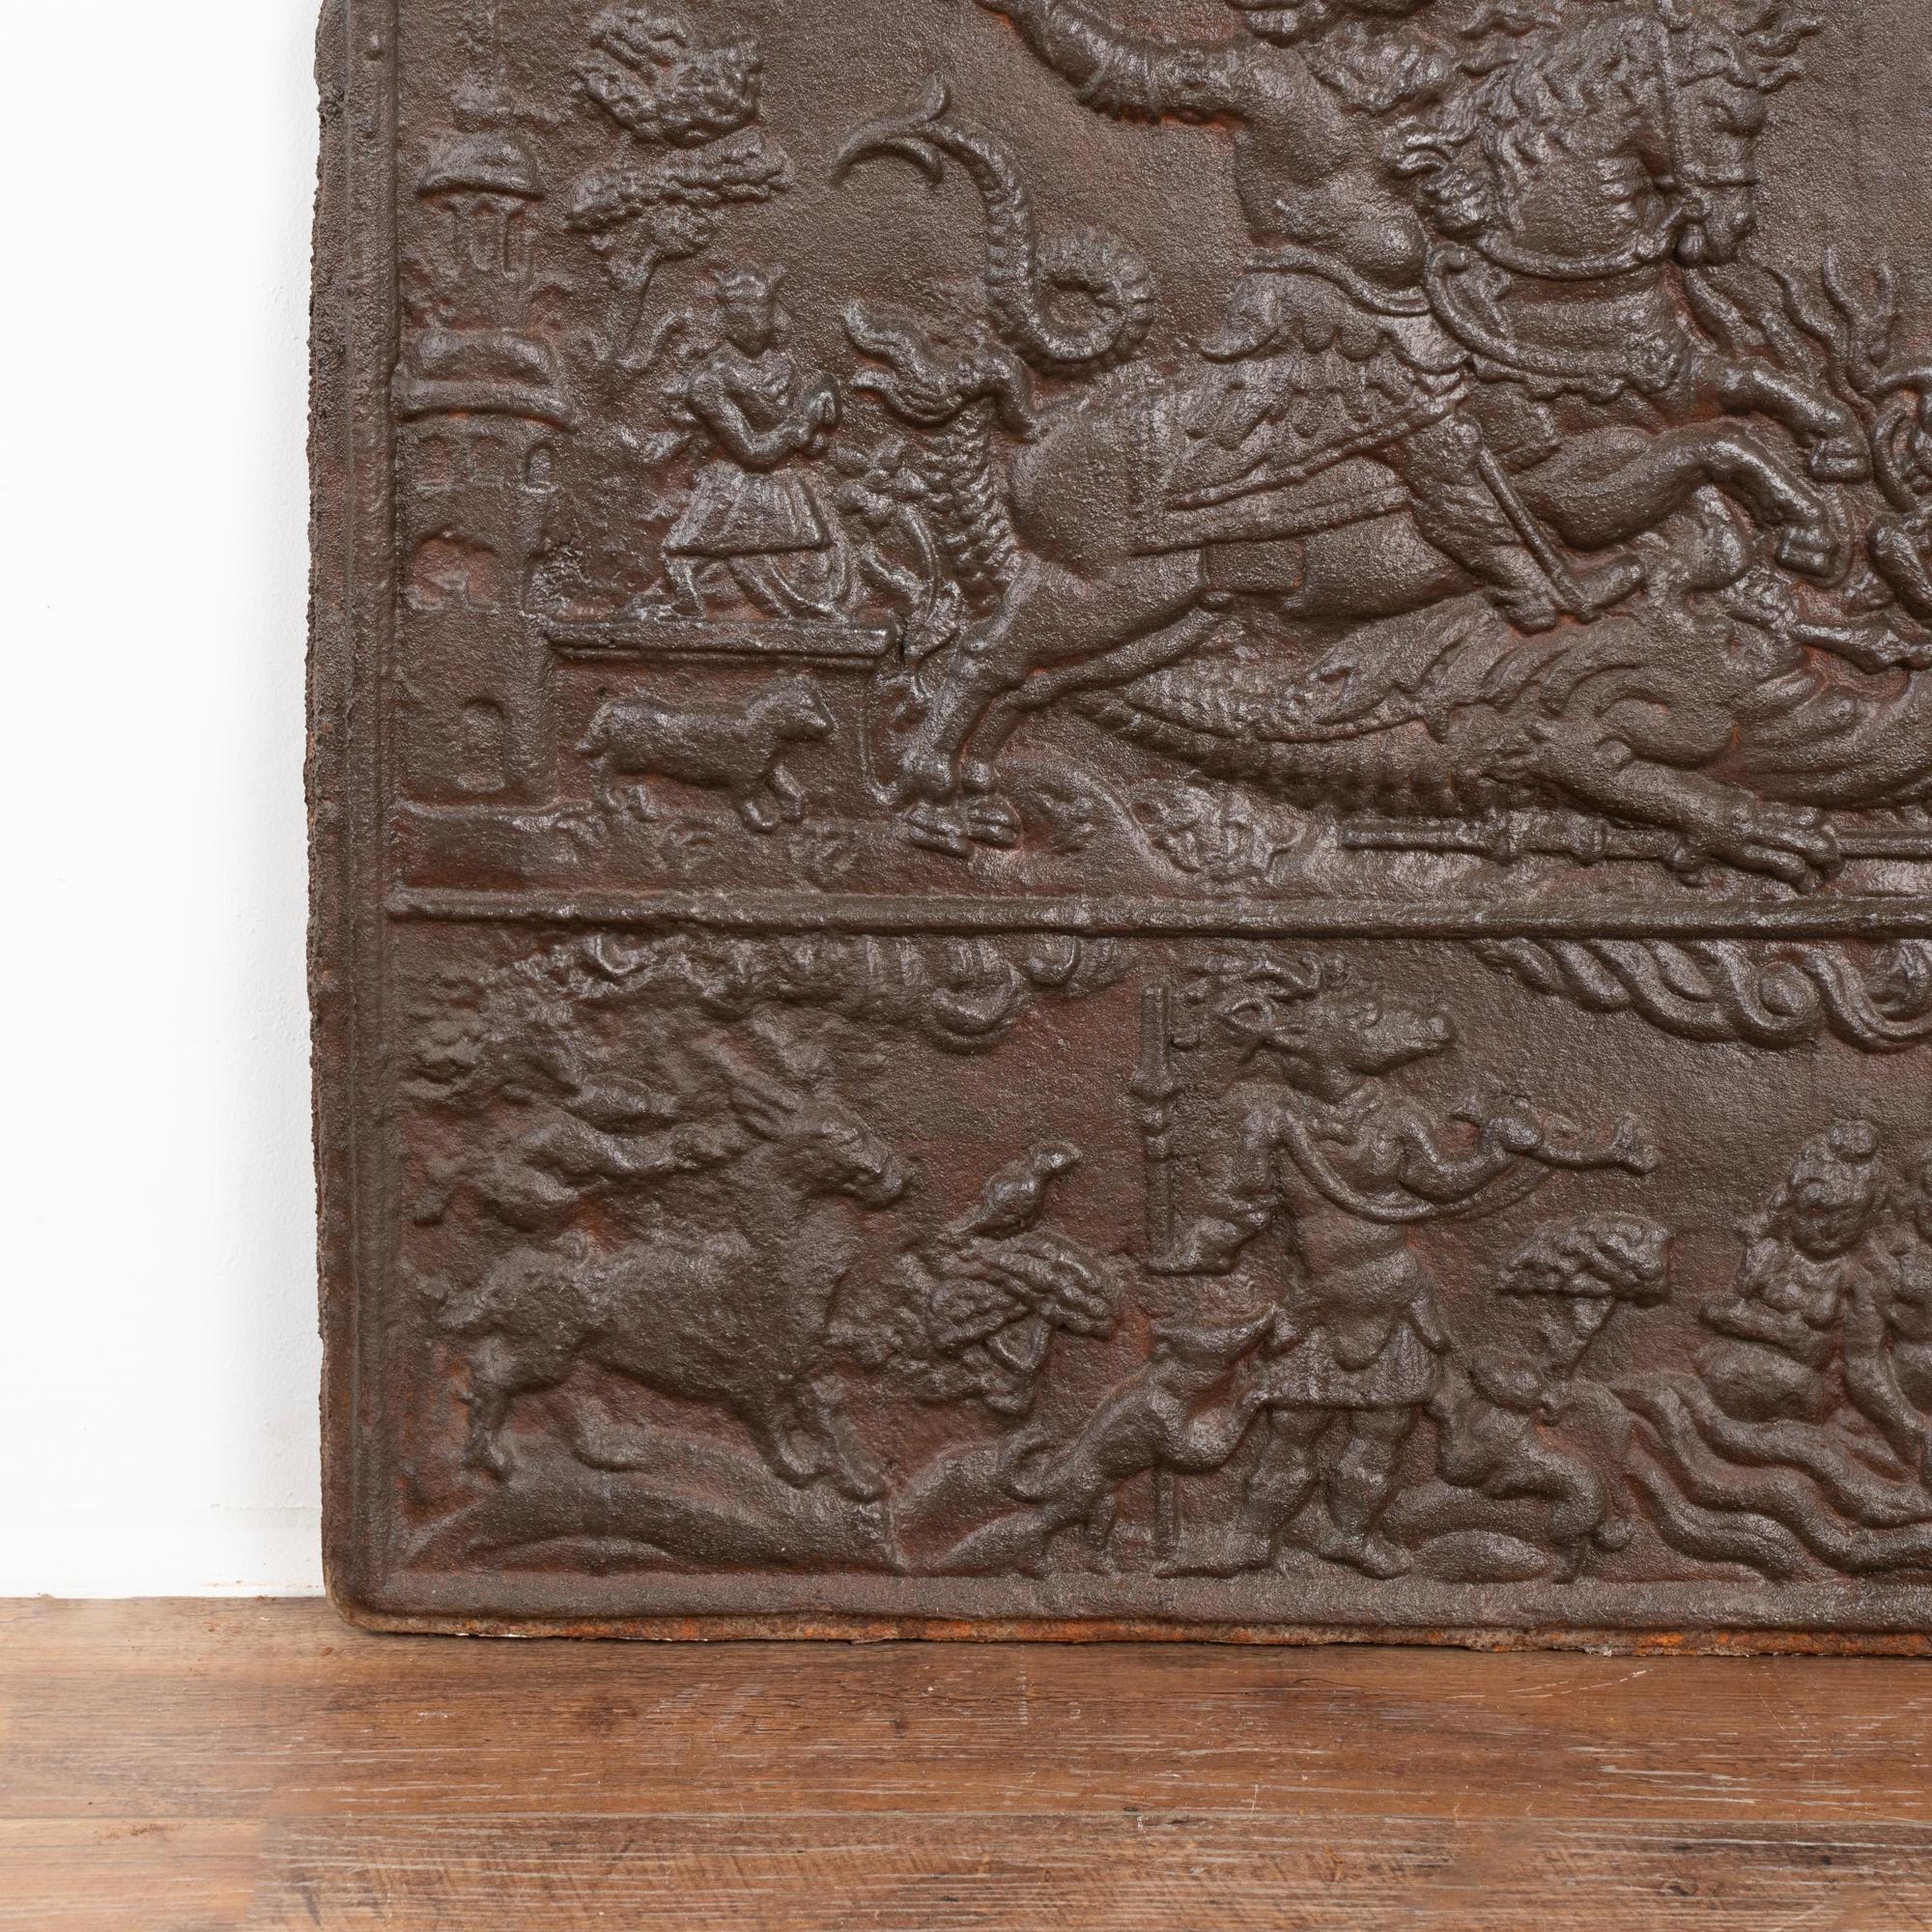 Cast Iron Fire Back With Soldier on Horseback, Sweden Circa 1760-1800 For Sale 1